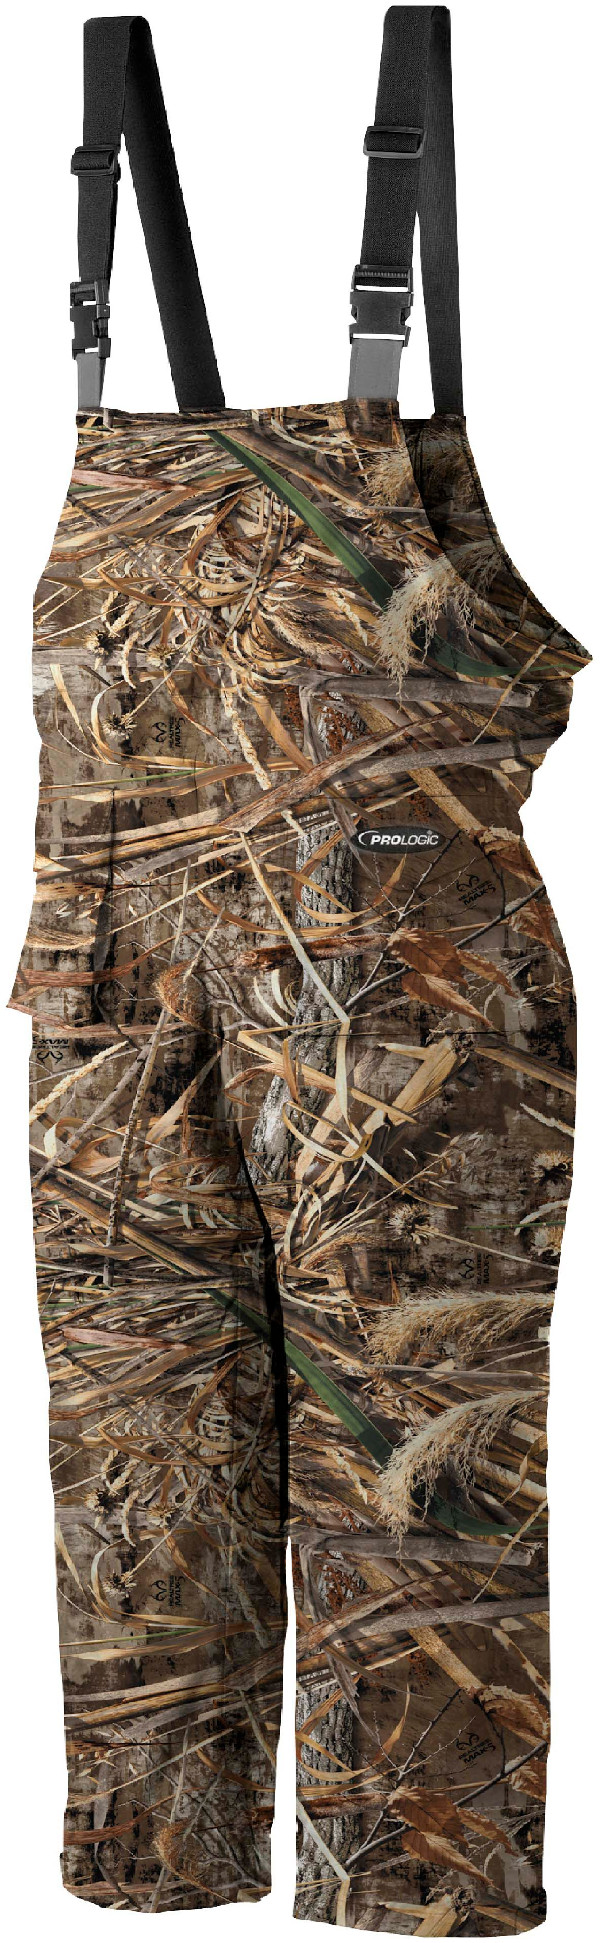 Completo Prologic Max5 Comfort Thermo Suit Camo